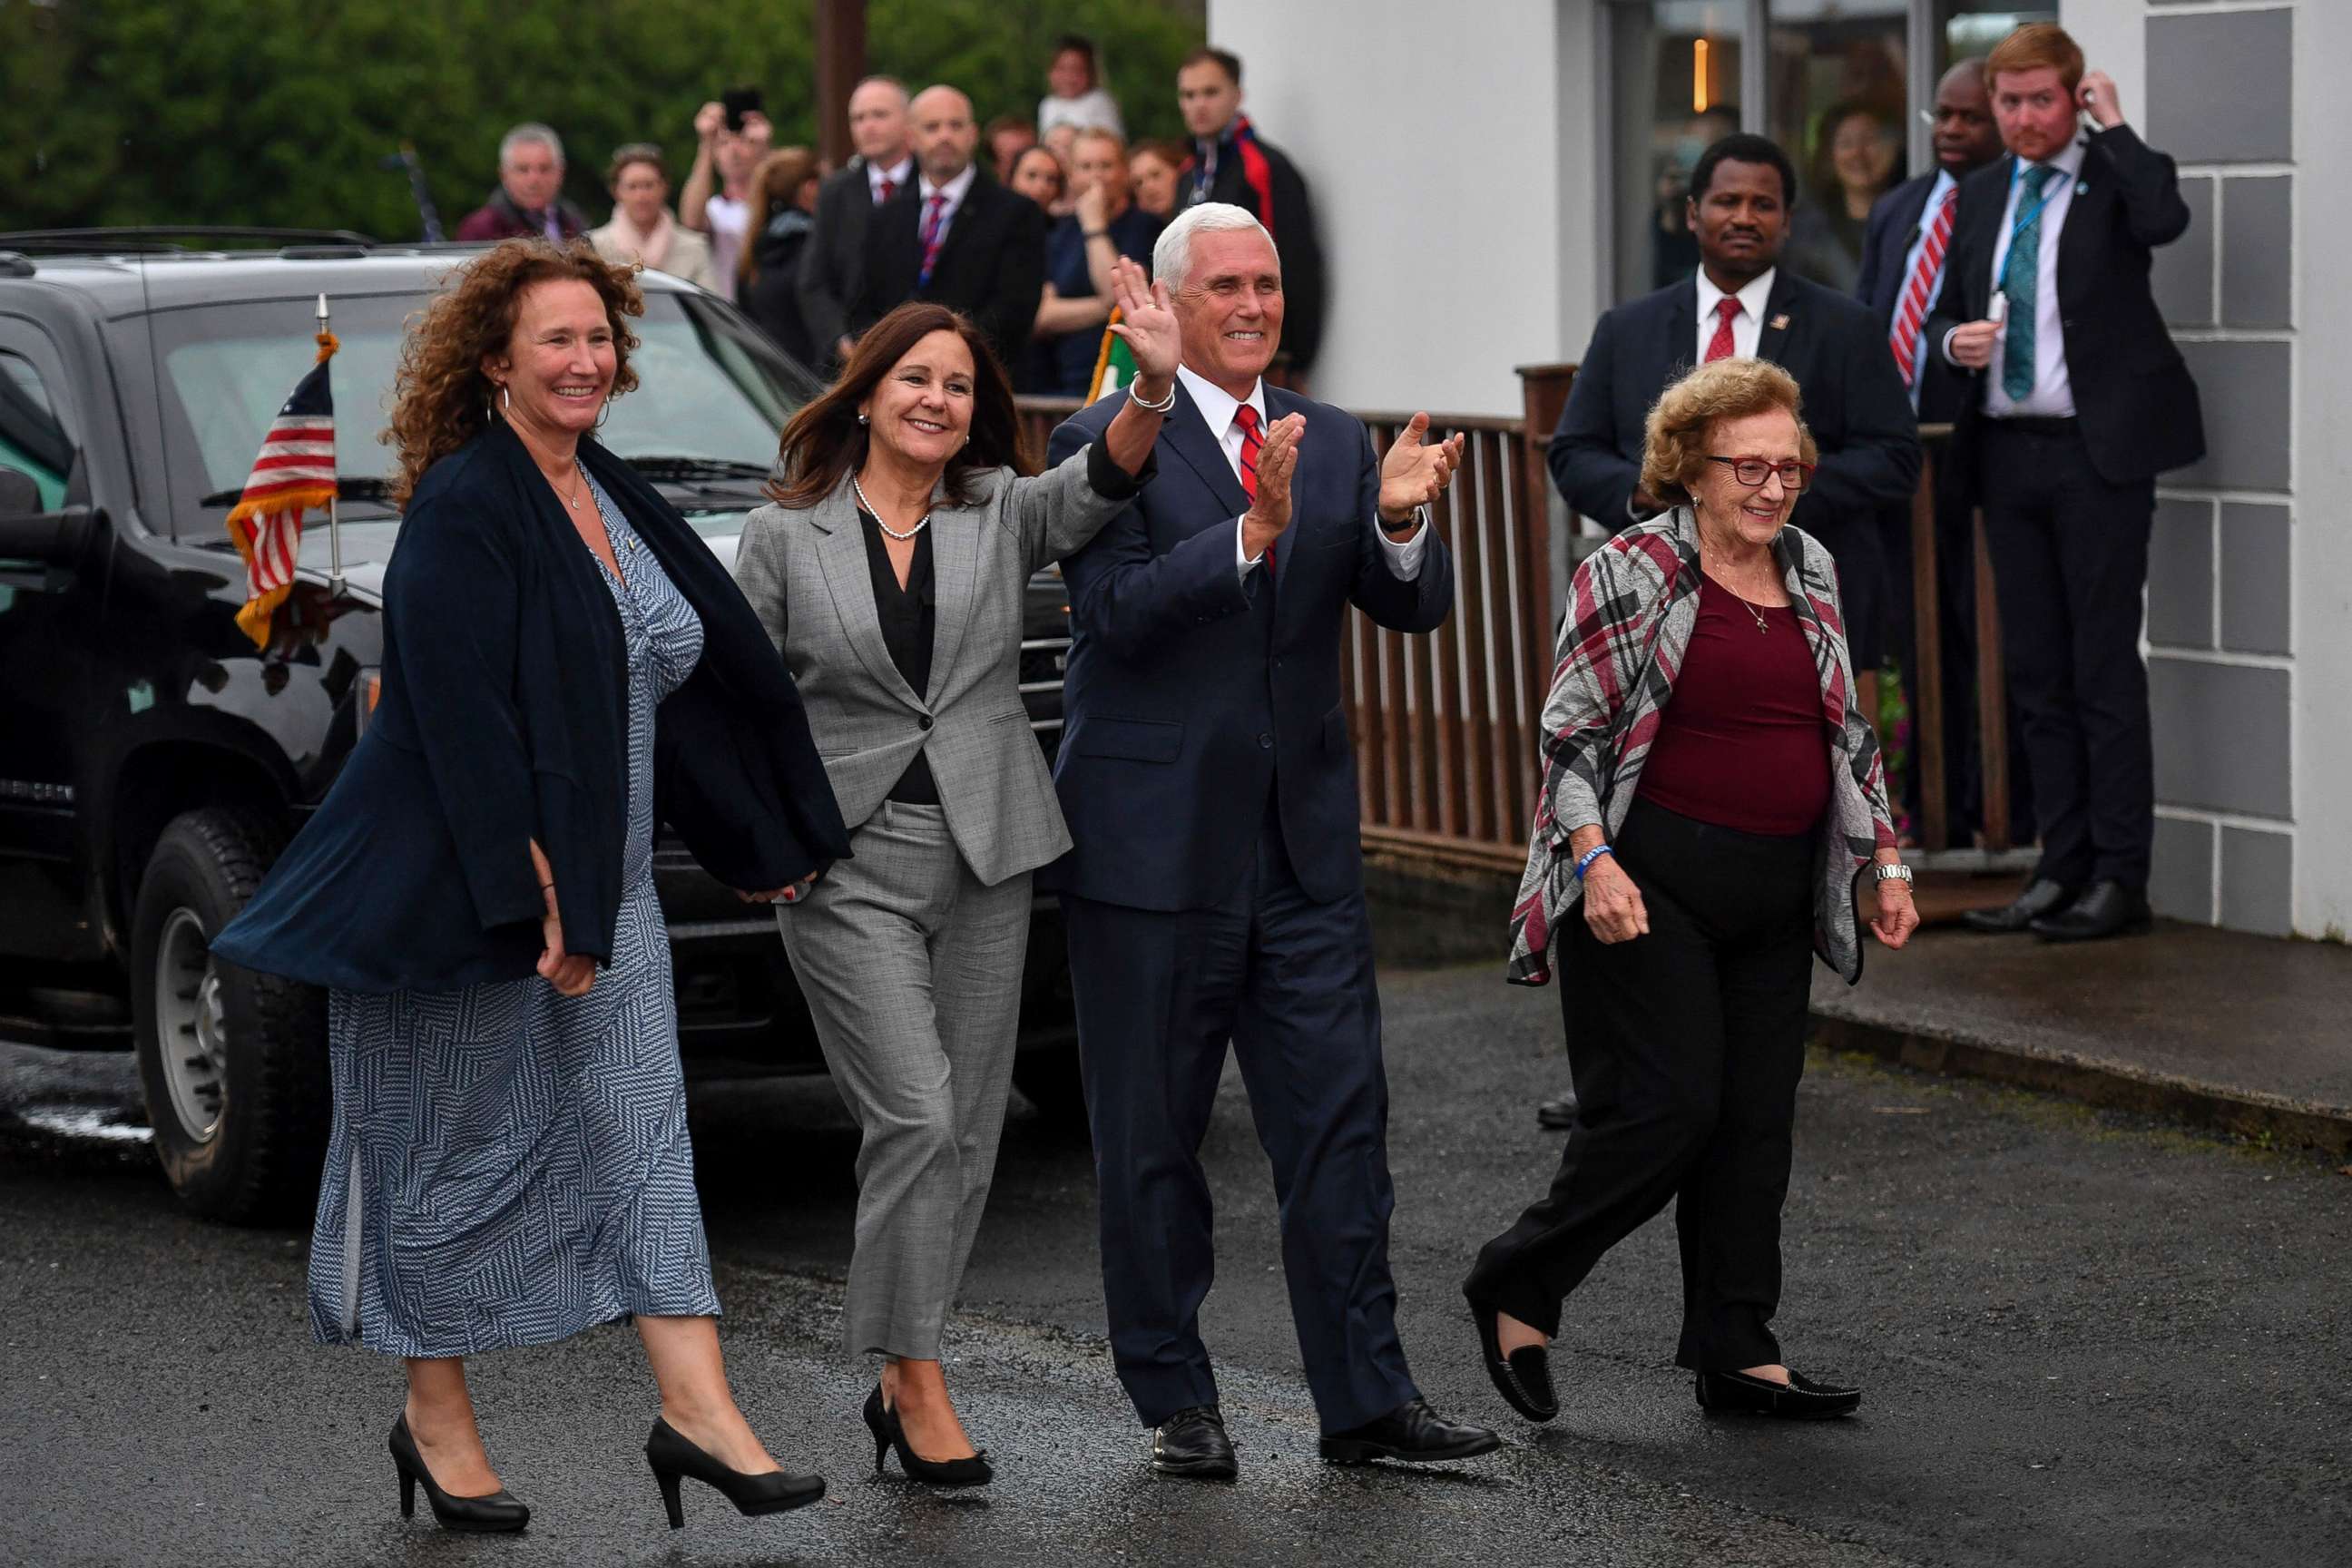 PHOTO: Vice President Mike Pence, his wife Karen Pence, second left, his sister Anne Pence Poynter, left, and his mother Nancy Pence Fritsch, right, arrive in Doonbeg, Ireland, Sept. 3, 2019.